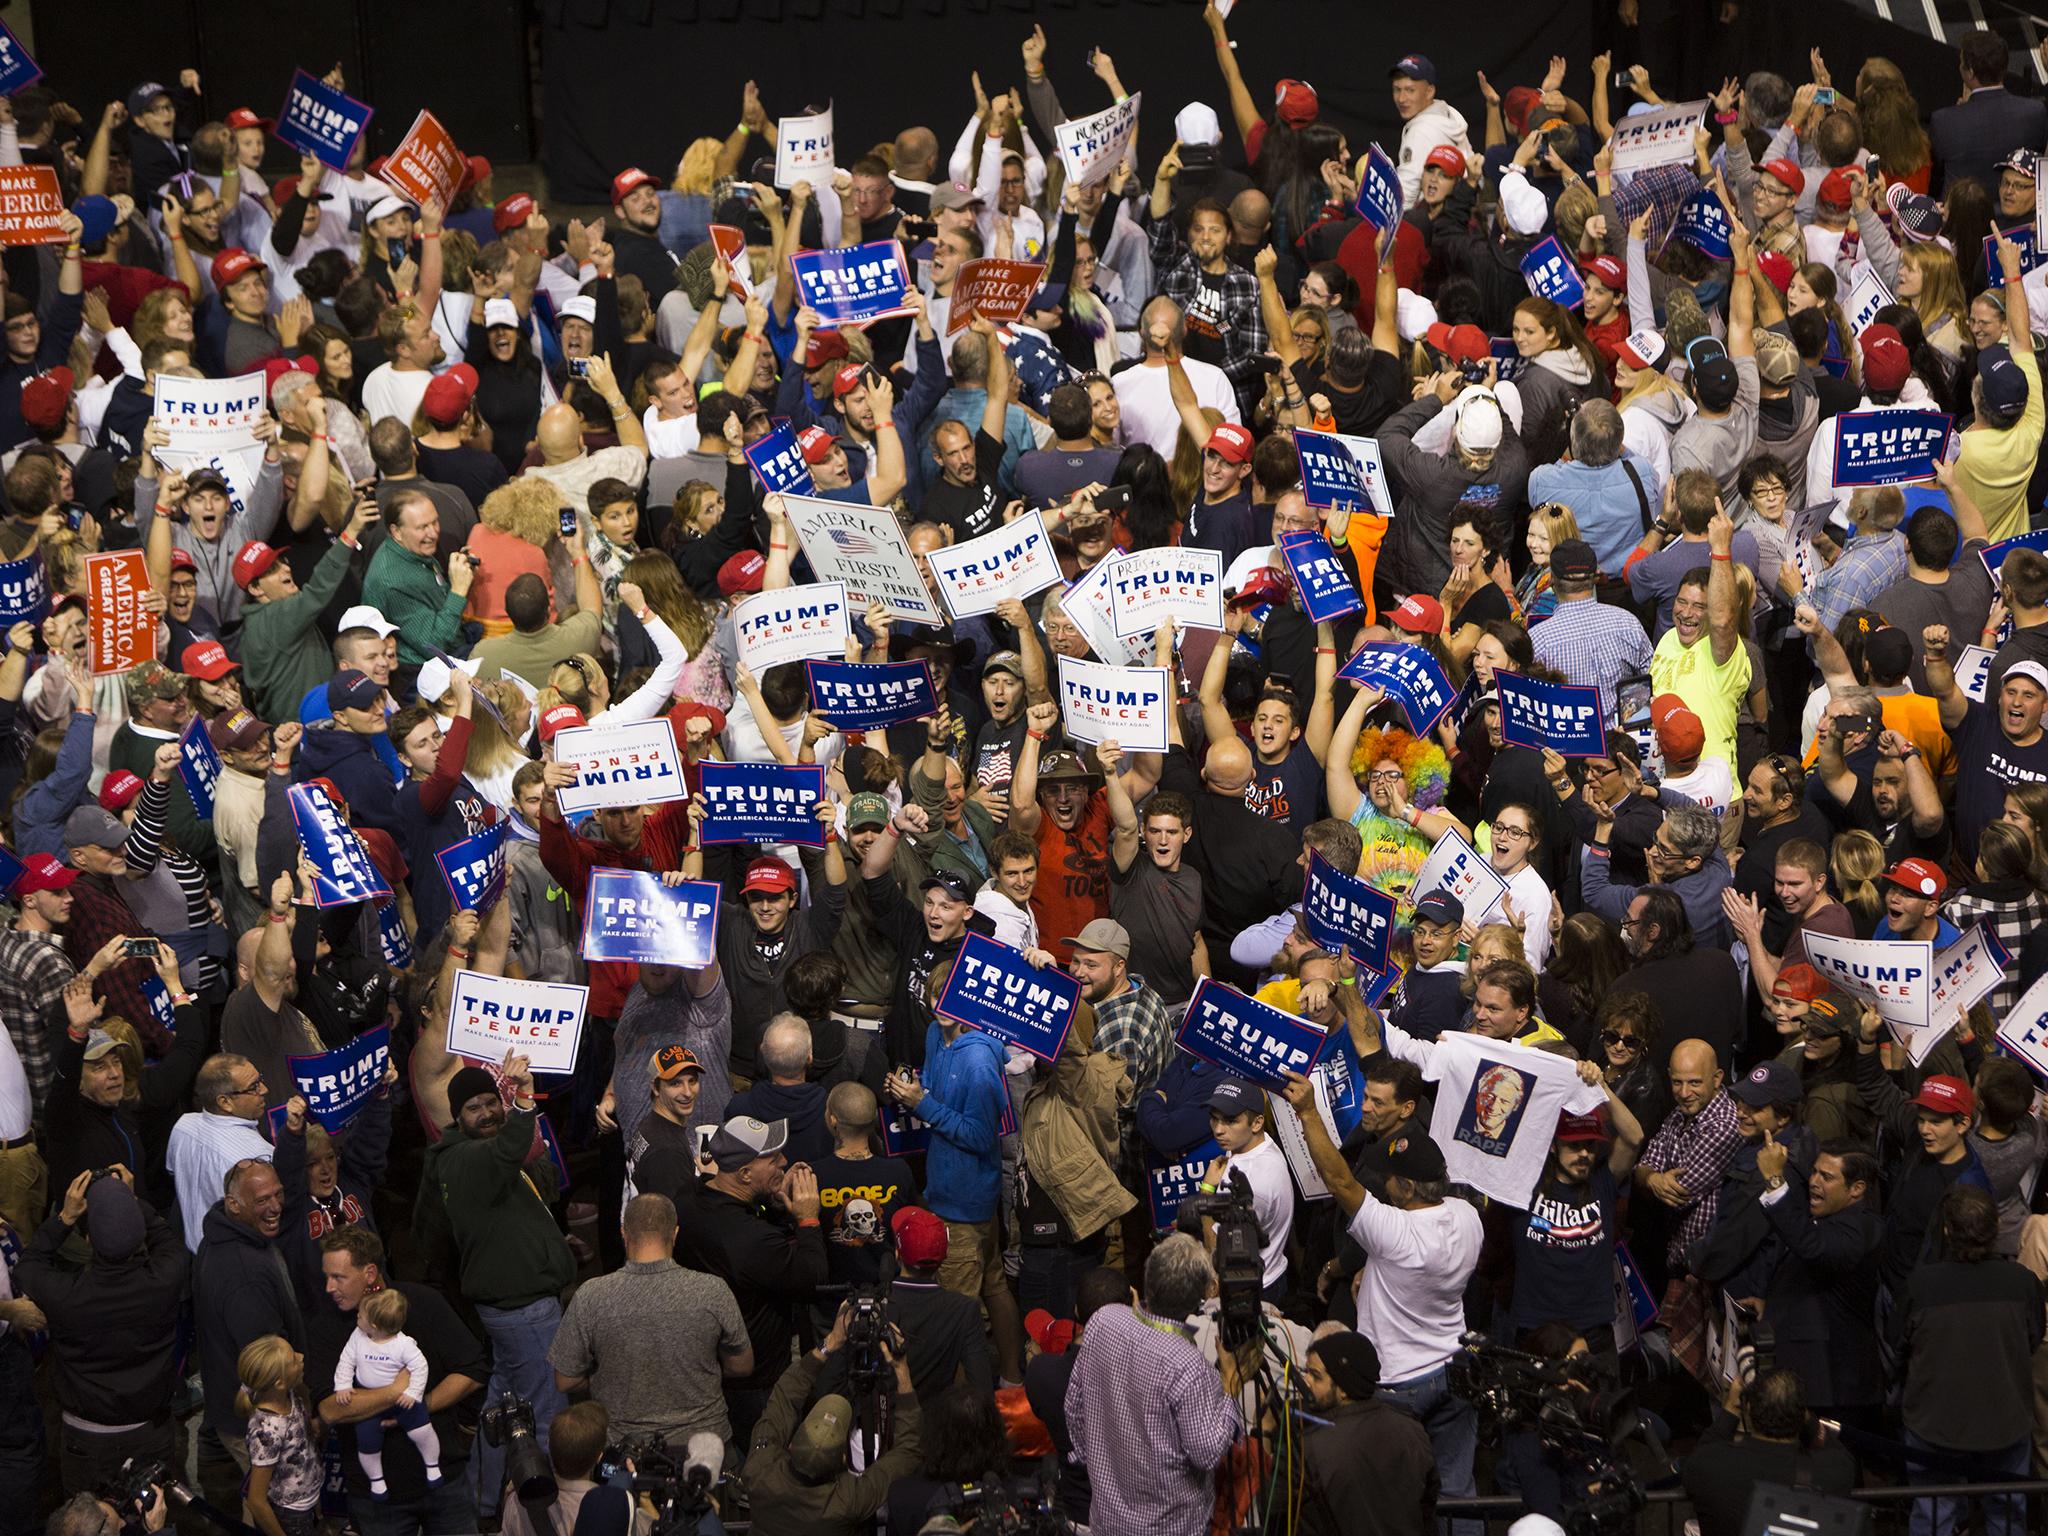 Supporters face the cameras and chant at a campaign rally for Donald Trump in Wilkes-Barre, Pennsylvania